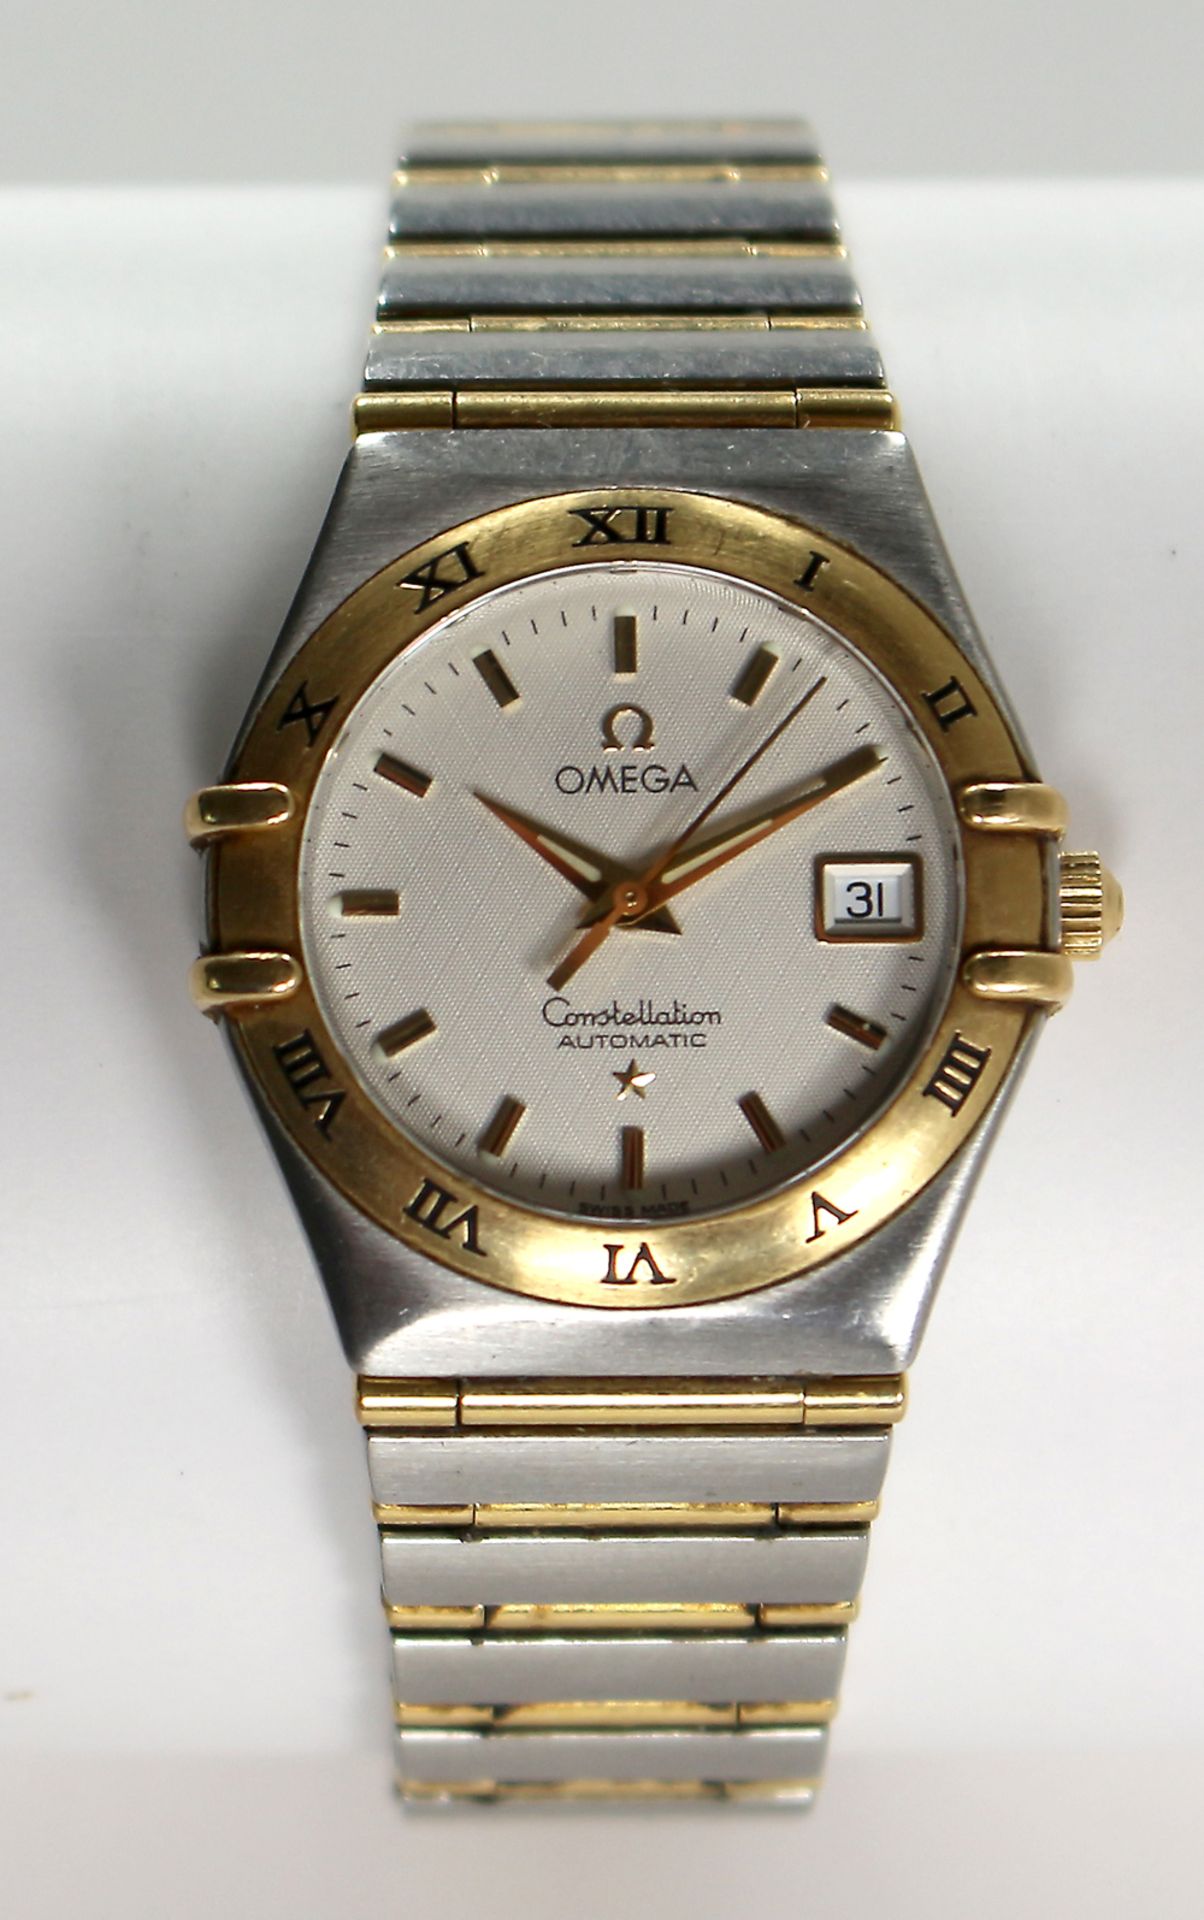 Omega Constellation Automatic - Image 2 of 2